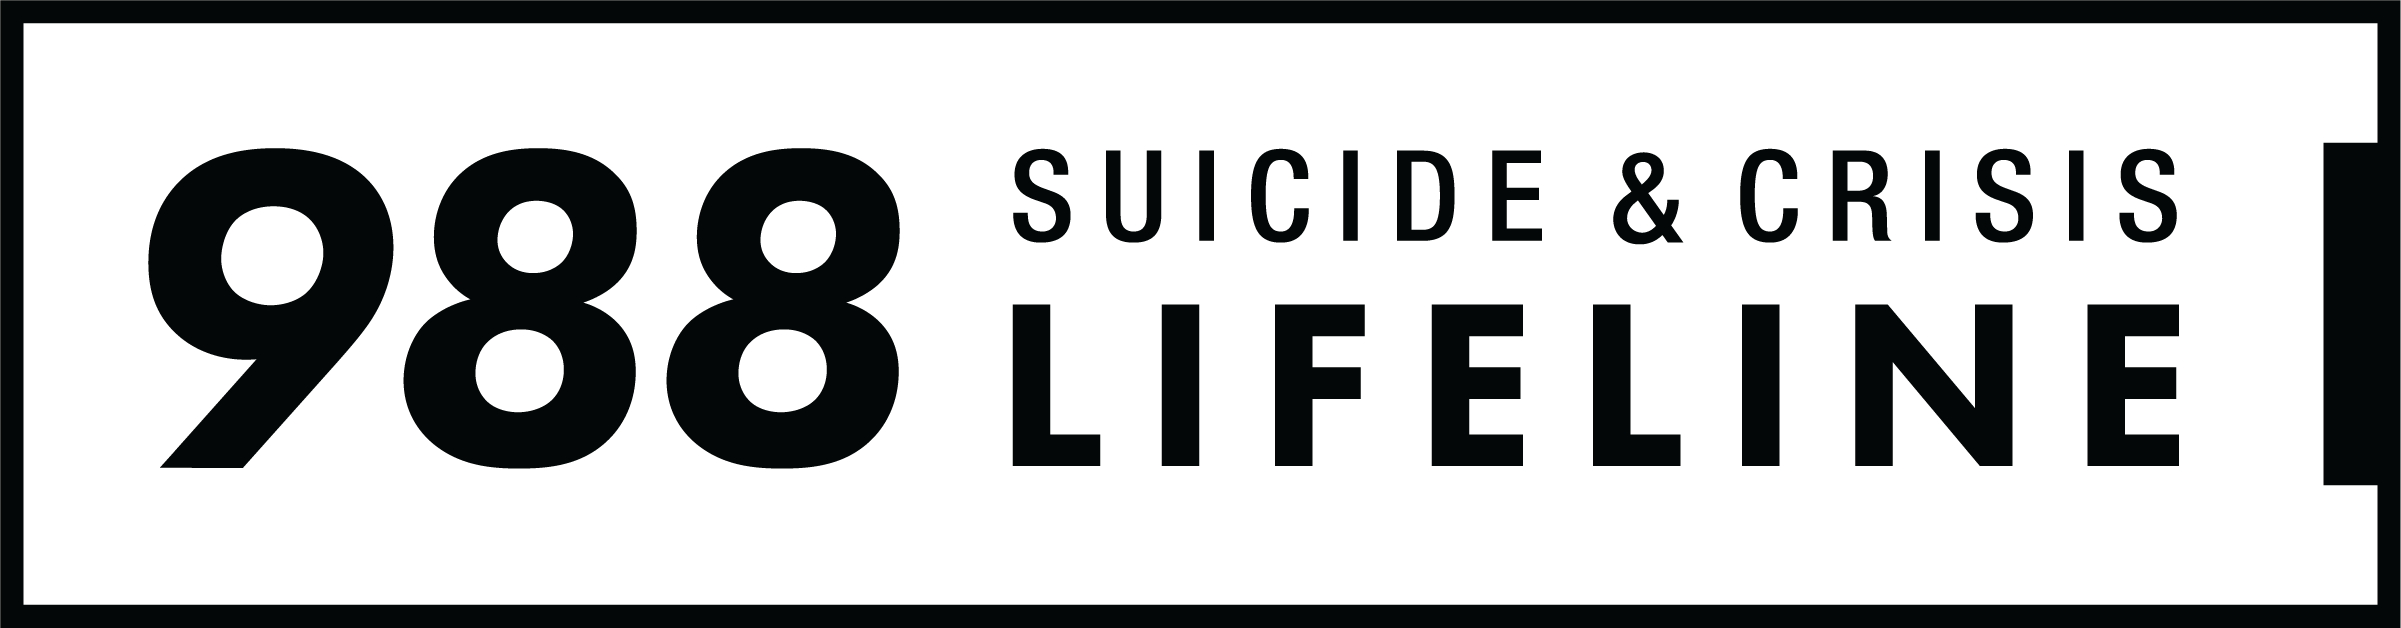 Suicide and Crisis Lifeline Logo with number 988